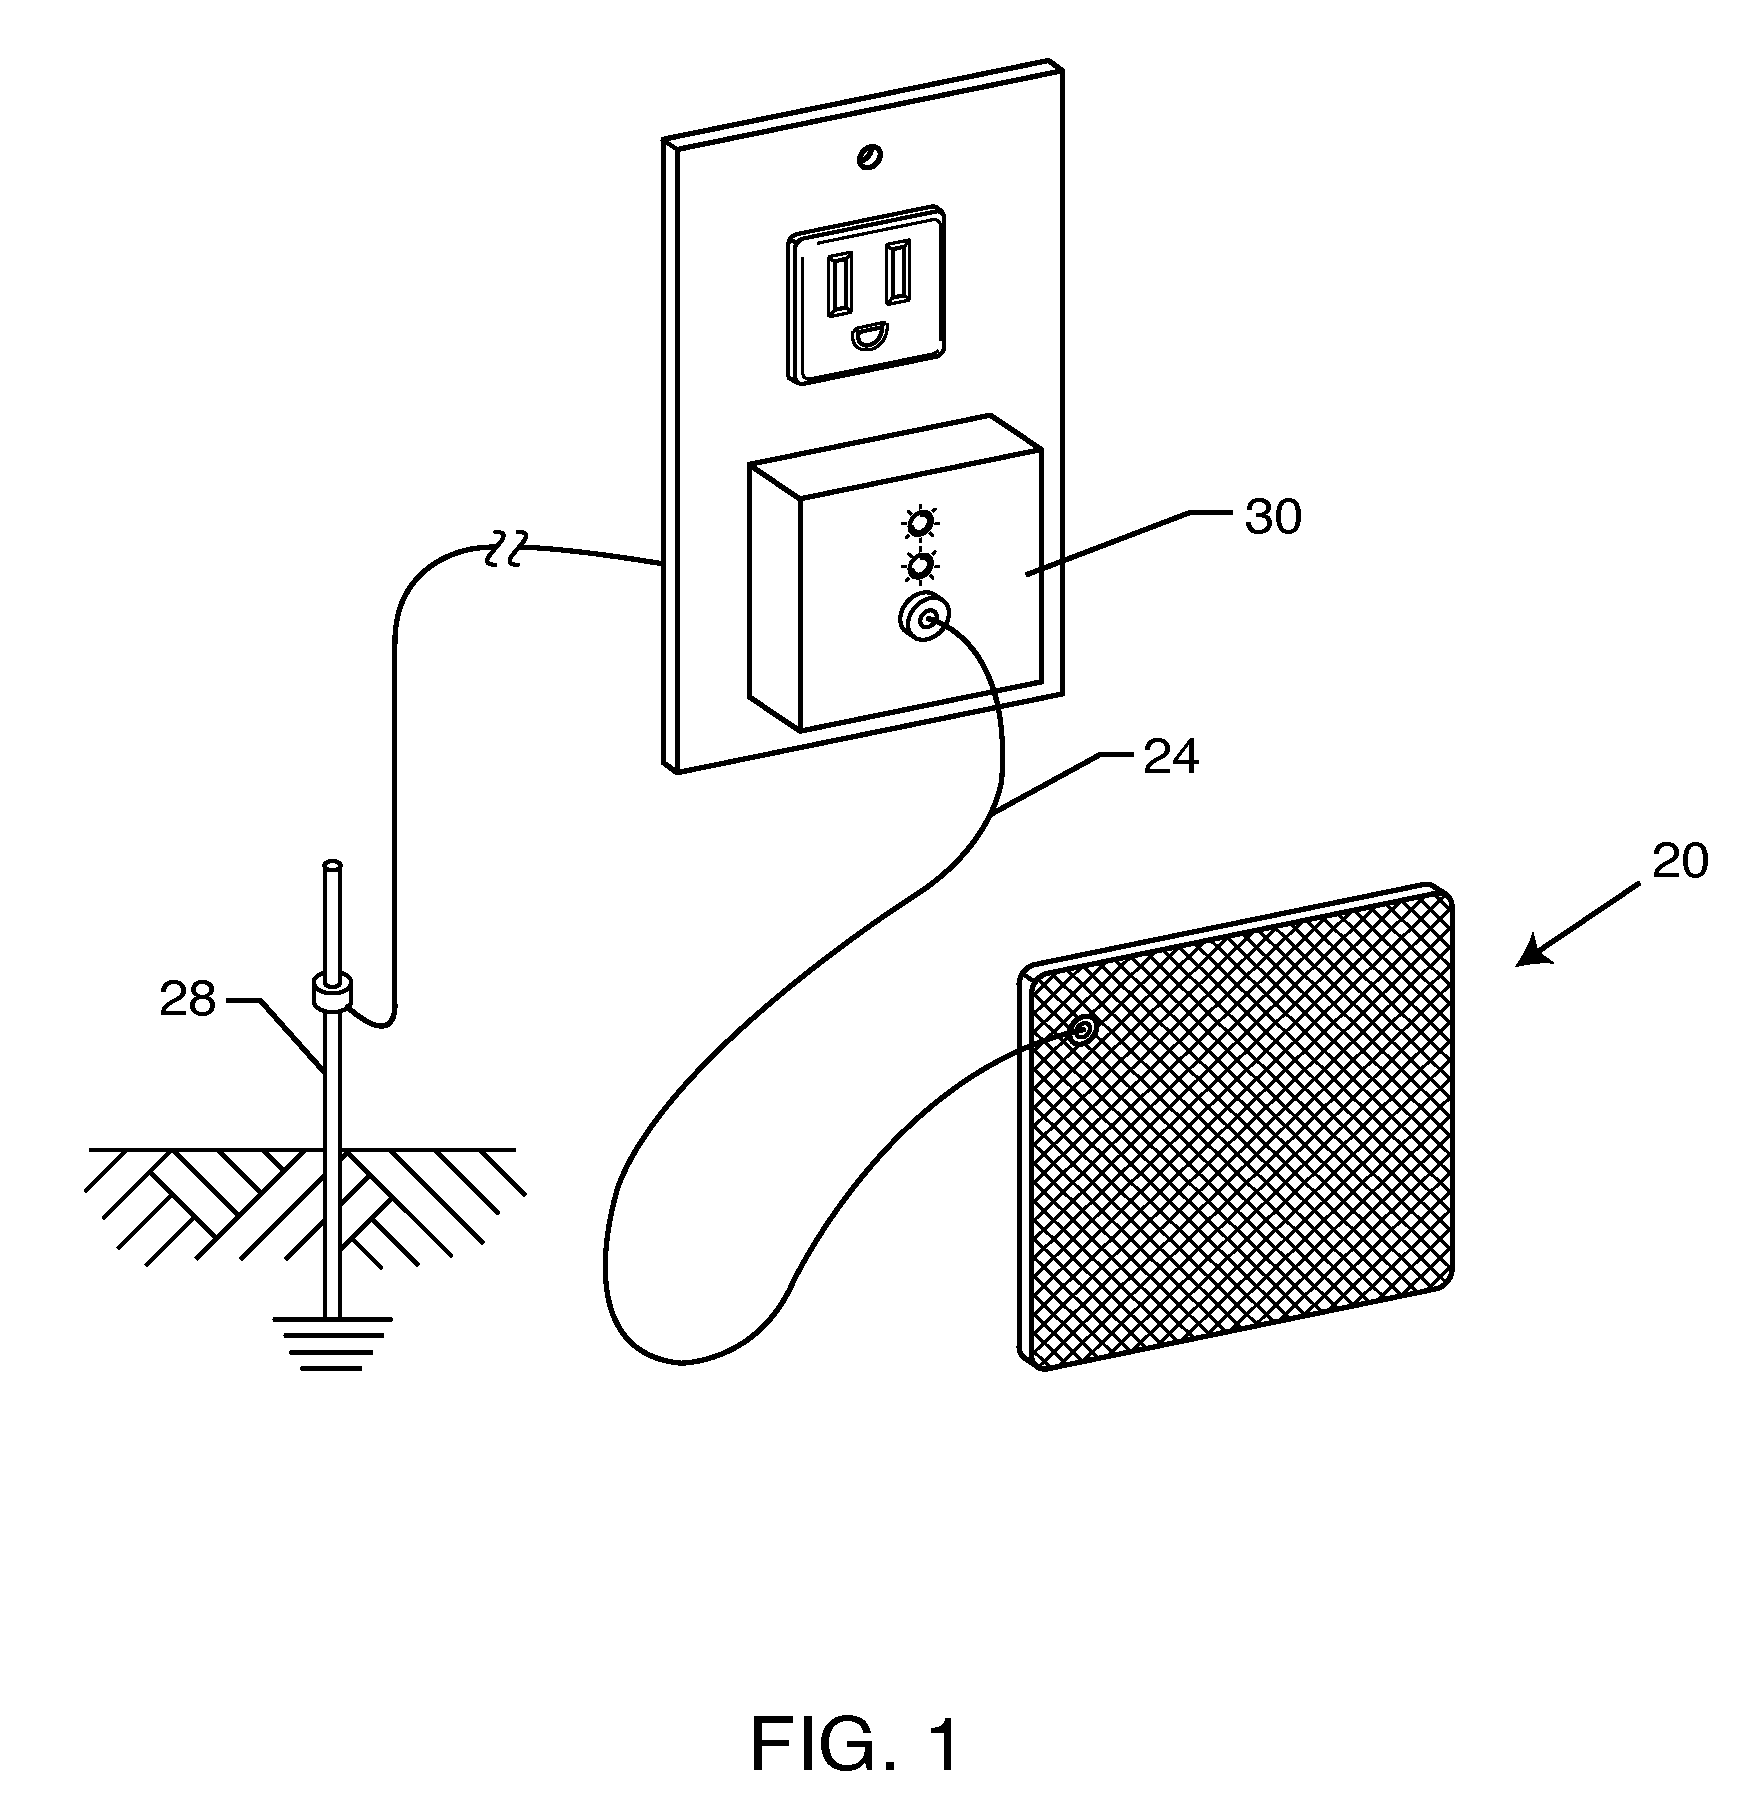 Method of treating inflammation and autoimmune diseases